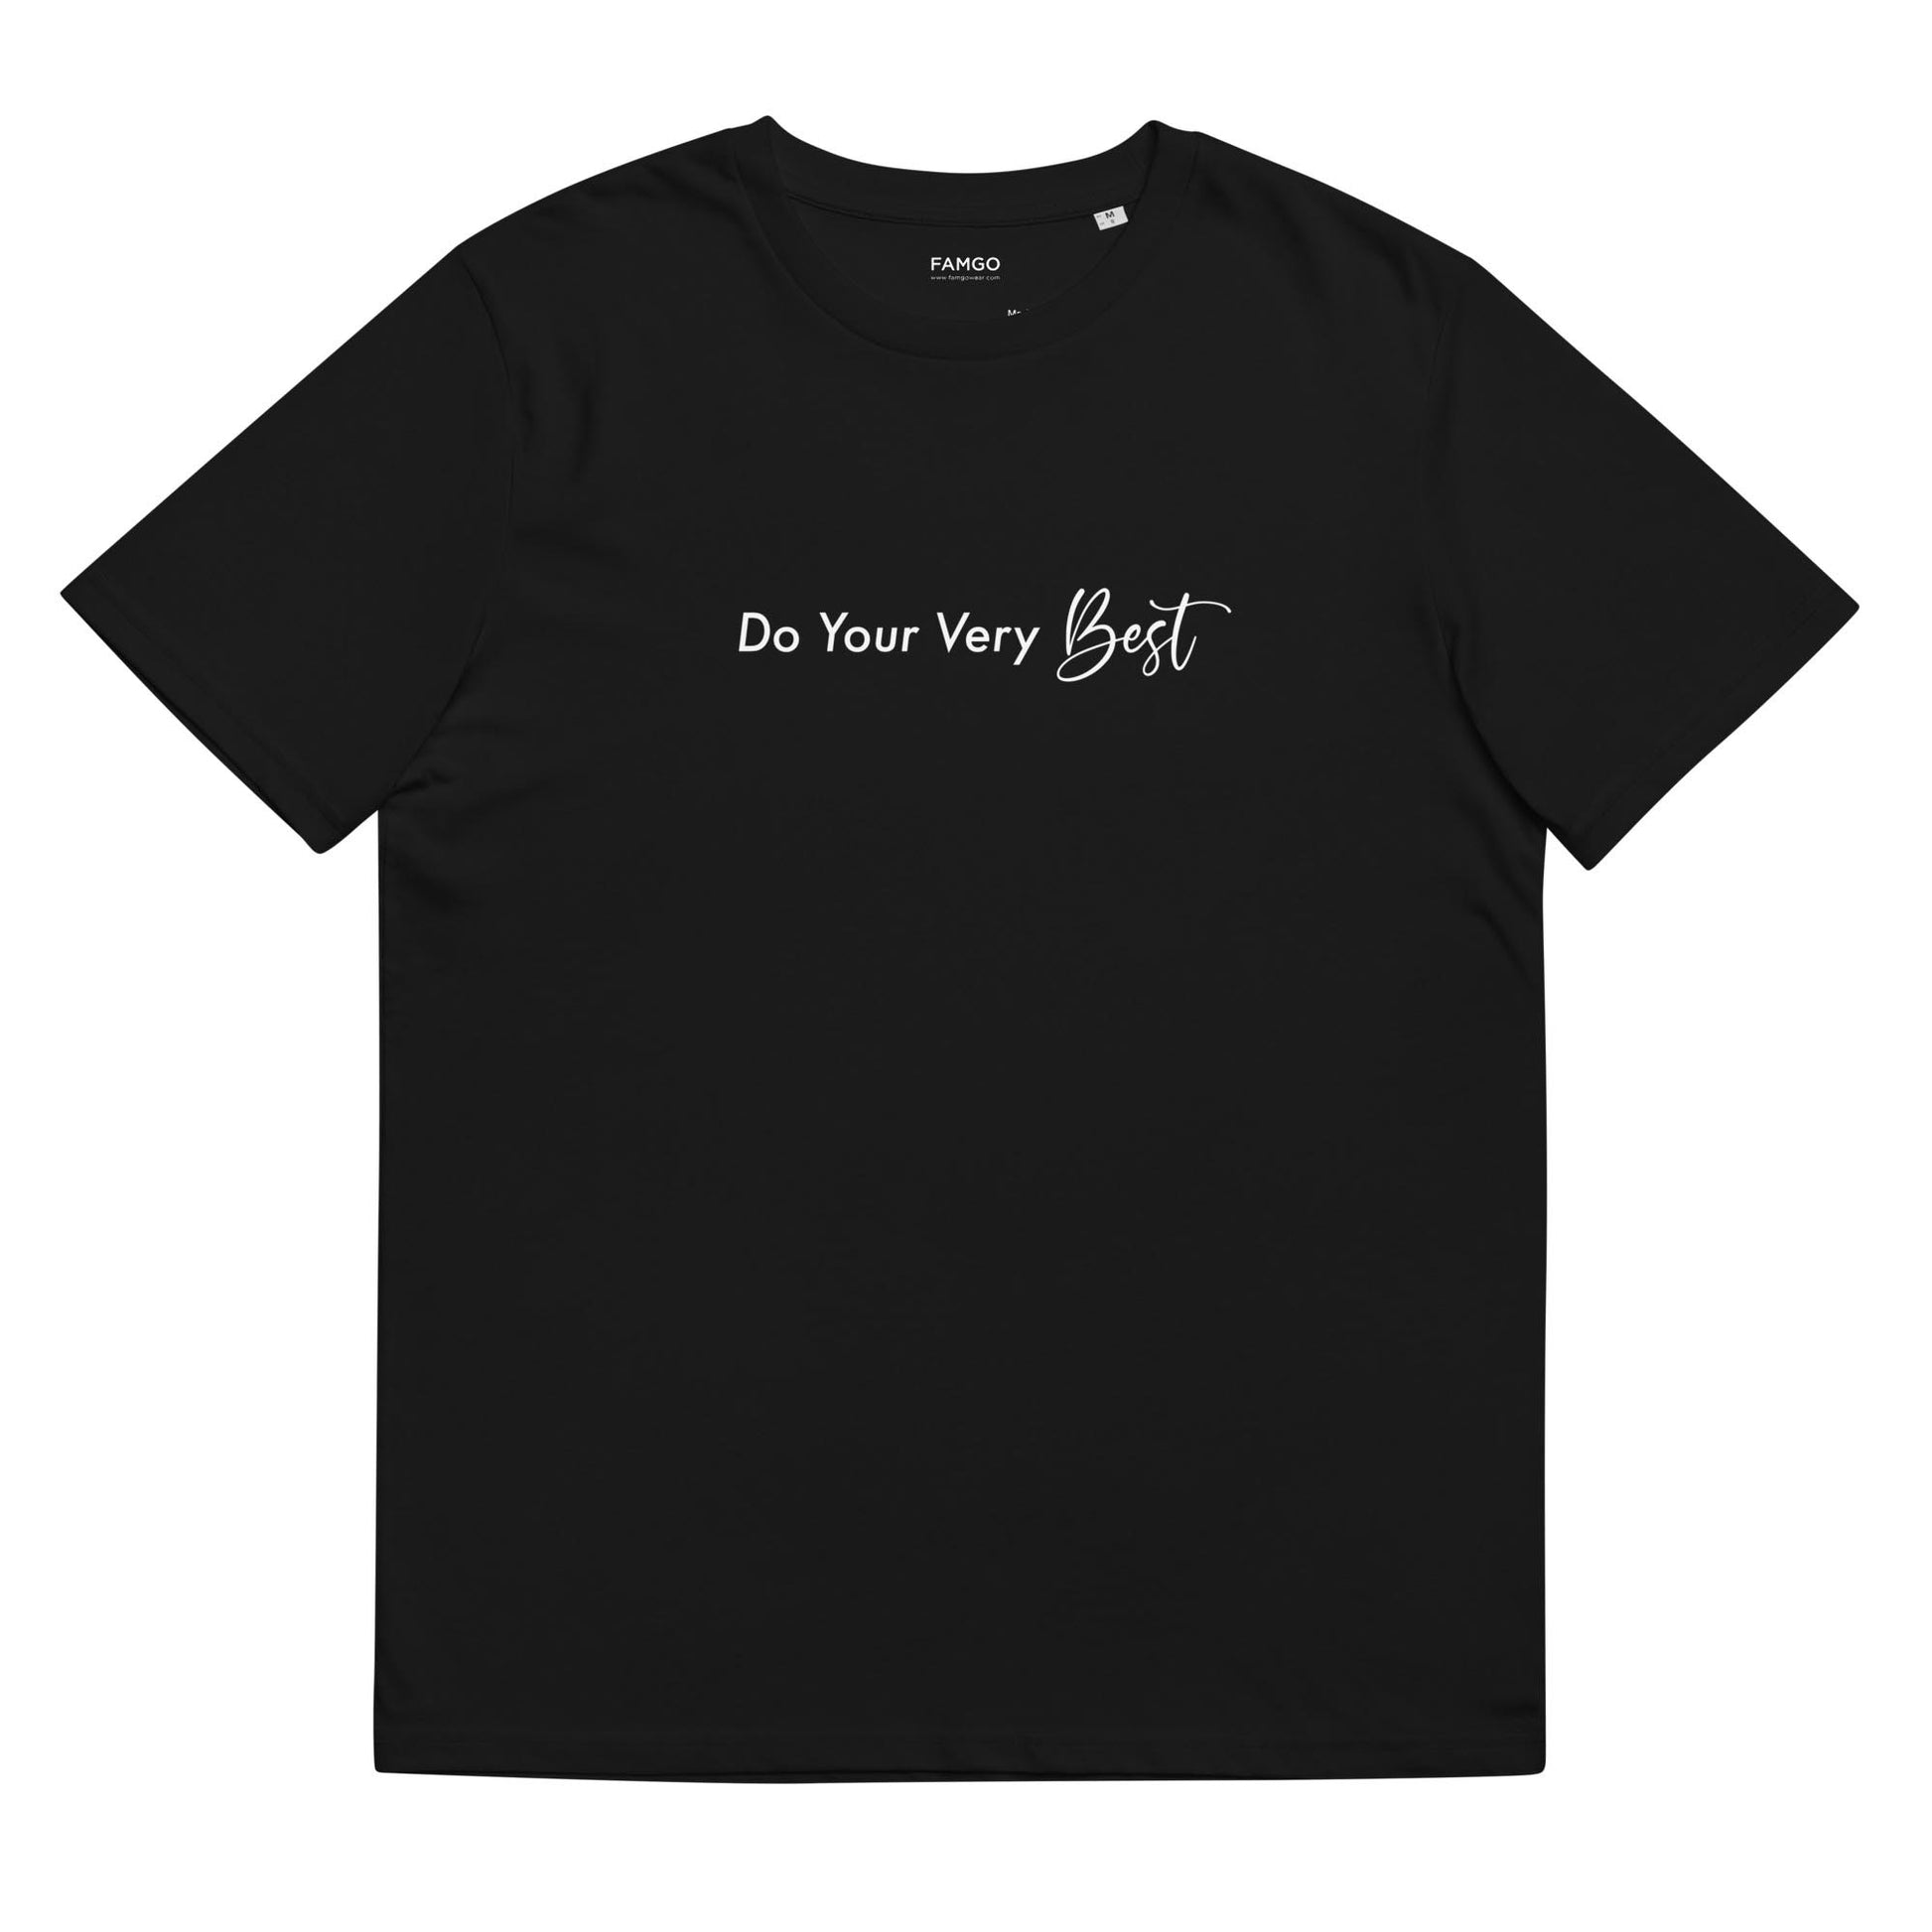 Men black motivational t-shirt with motivational quote, "Do Your Very Best."